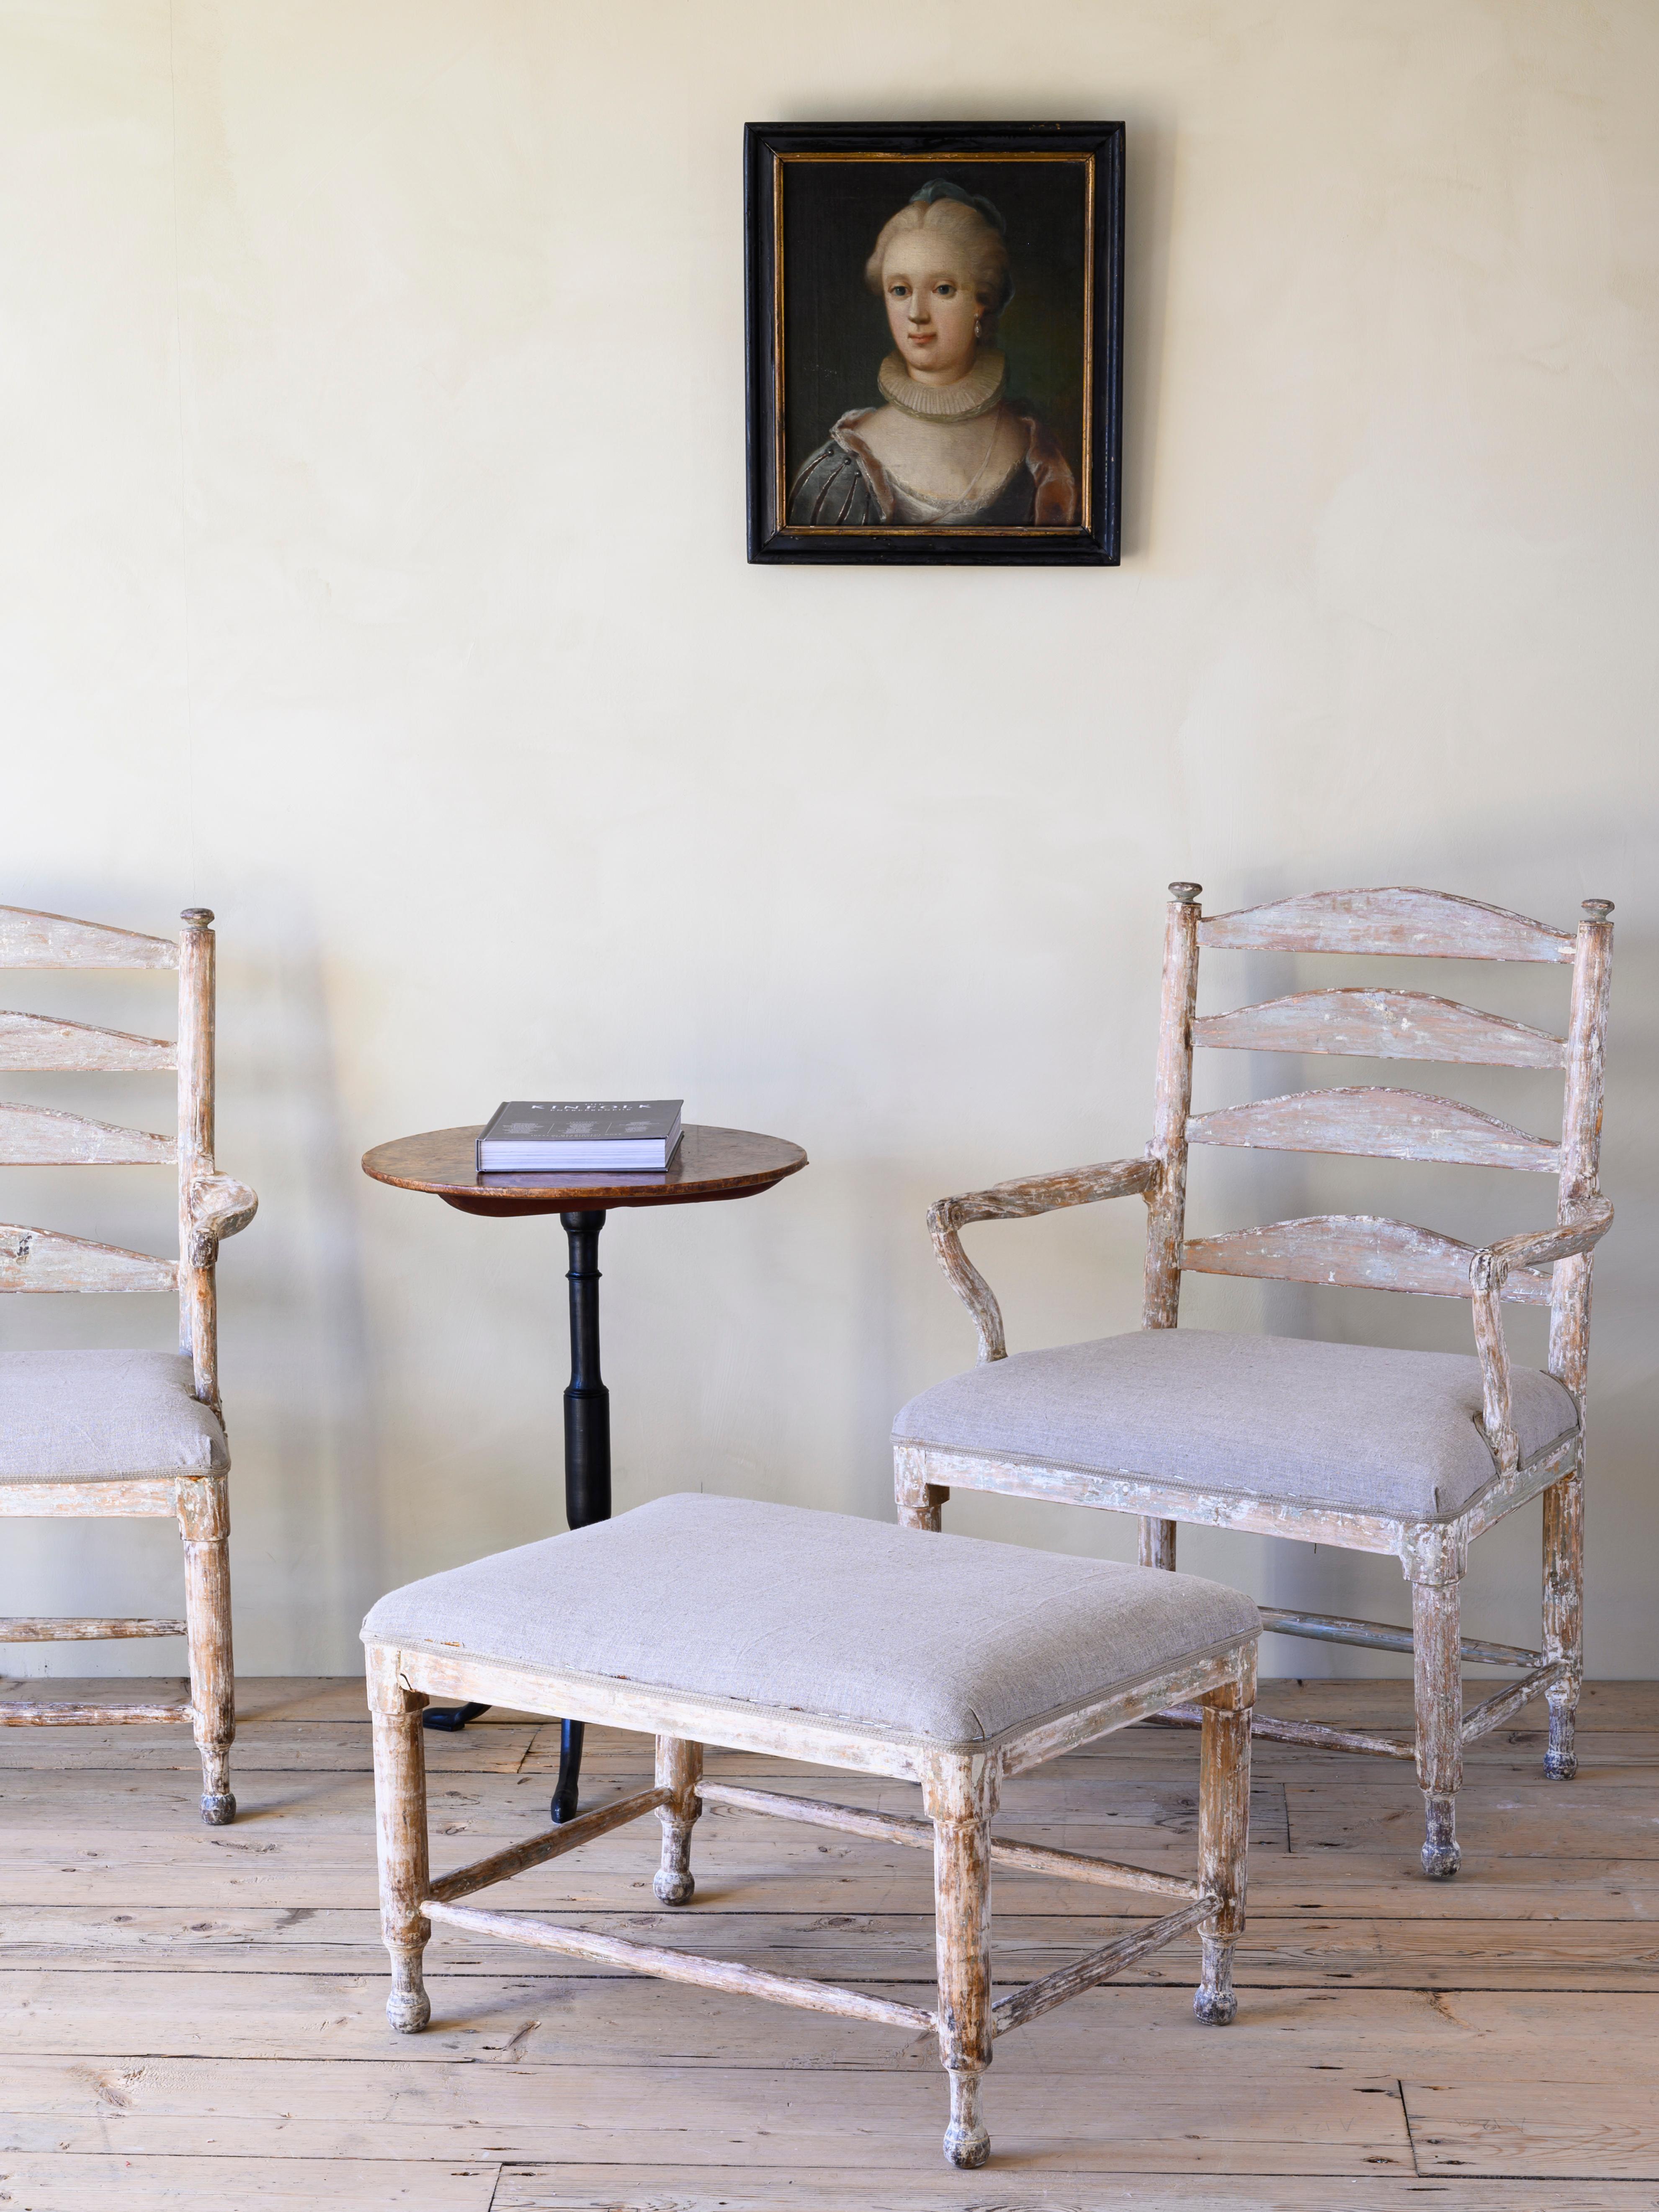 Good pair of 18th century Swedish Rococo Gripsholm armchairs with accompanying stool, circa 1775.

The armchairs got its name from the Gripsholm castle when the king Gustav III decorated most of the bedrooms with this model of armchair in the late